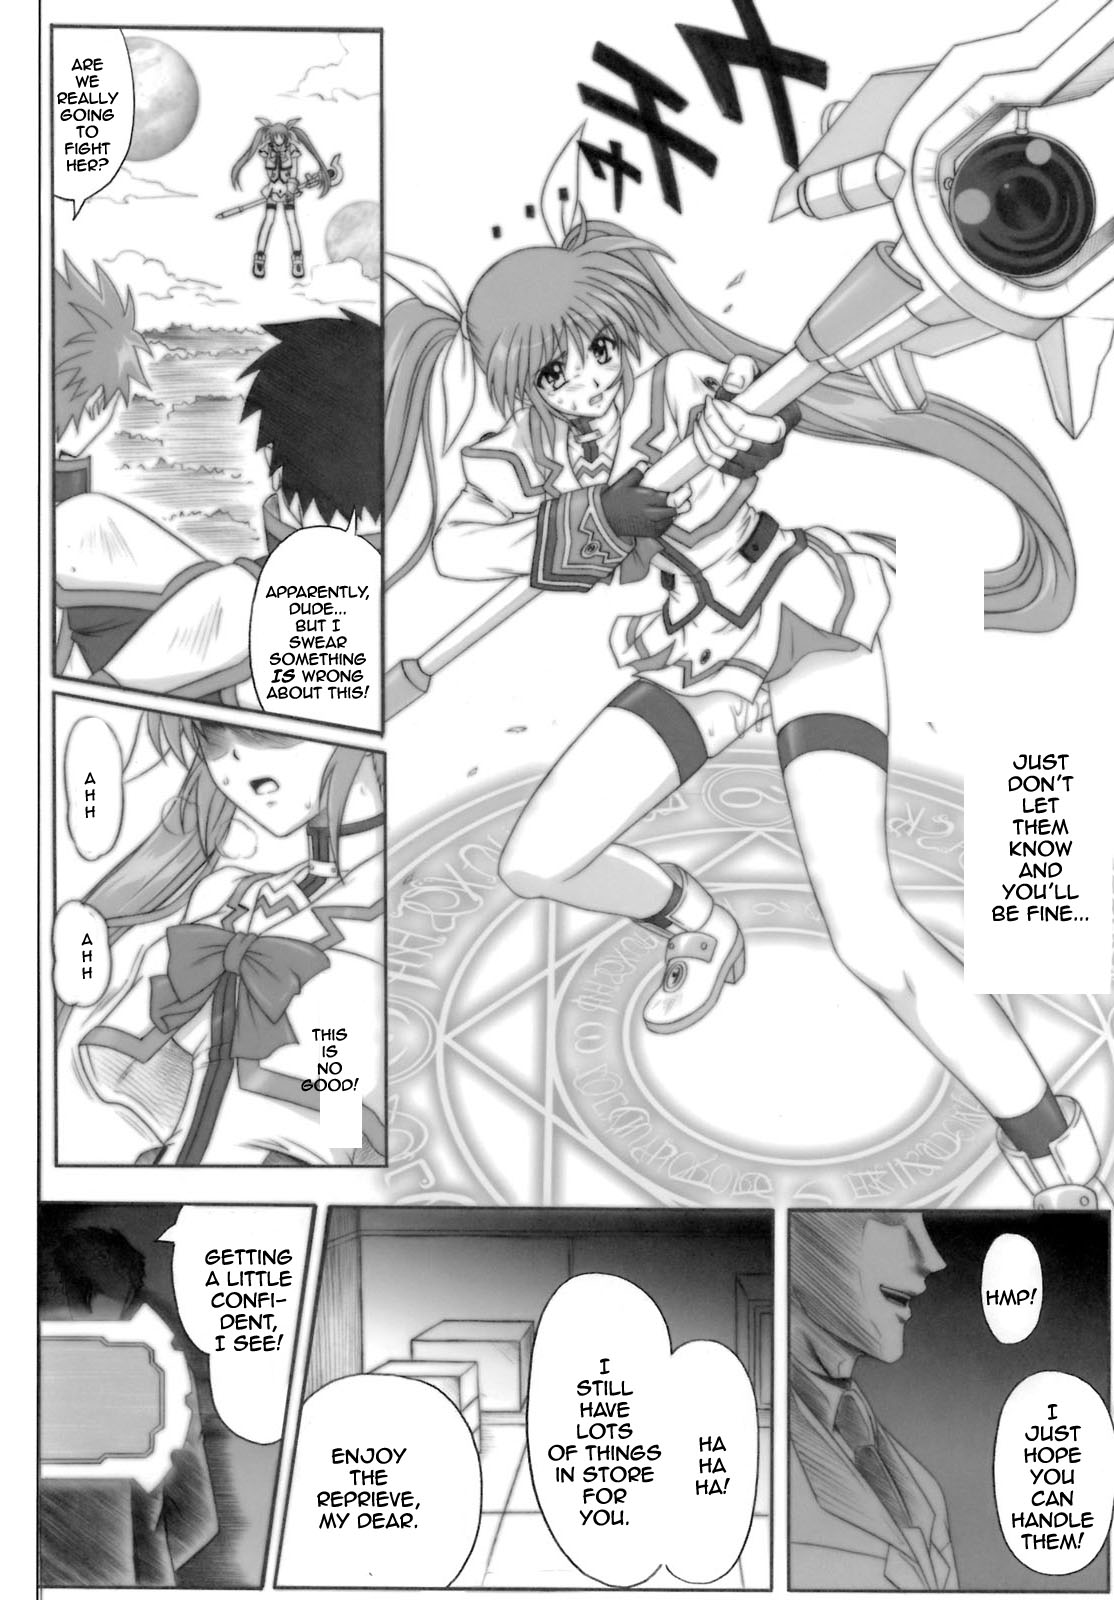 840 Color Classic Situation Note Extention (Mahou Shoujo Lyrical Nanoha) [English] [Rewrite] page 22 full